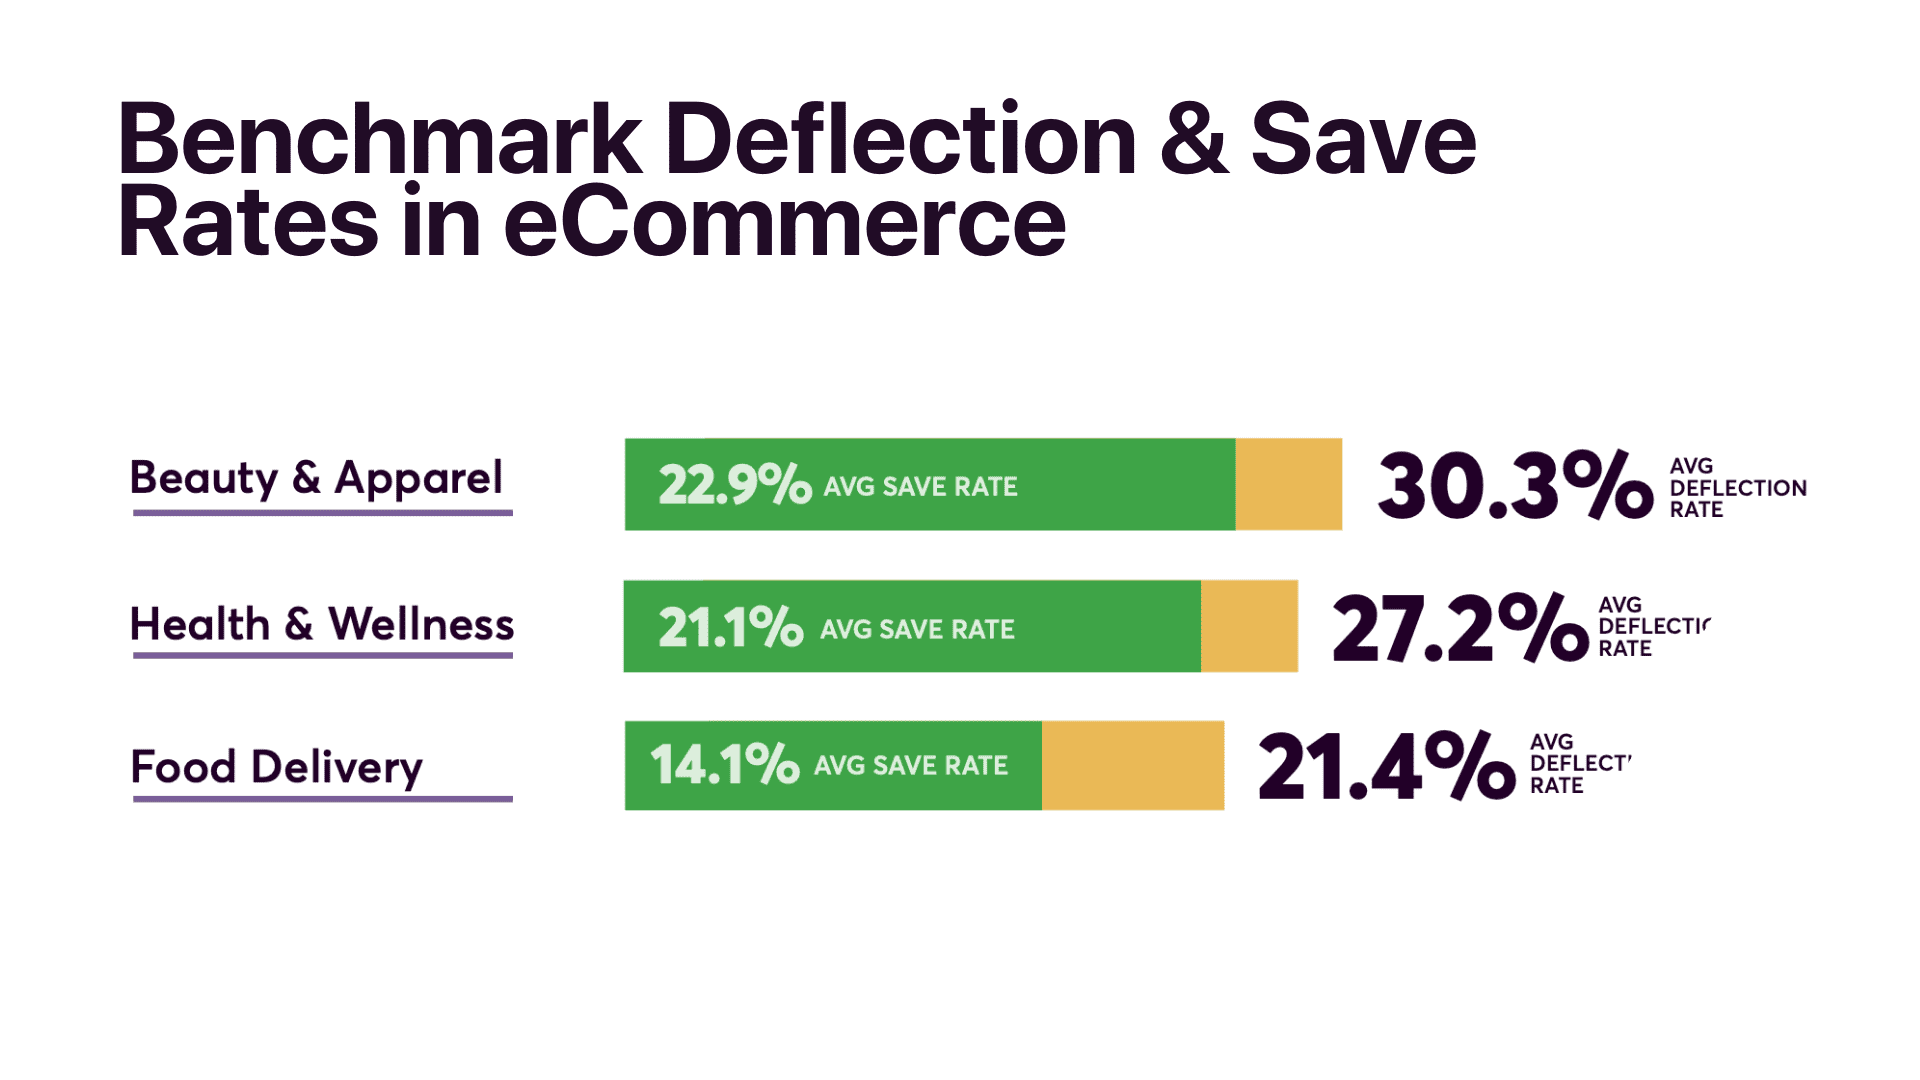 Benchmark customer deflection and save rate for subscription eCommerce businesses 